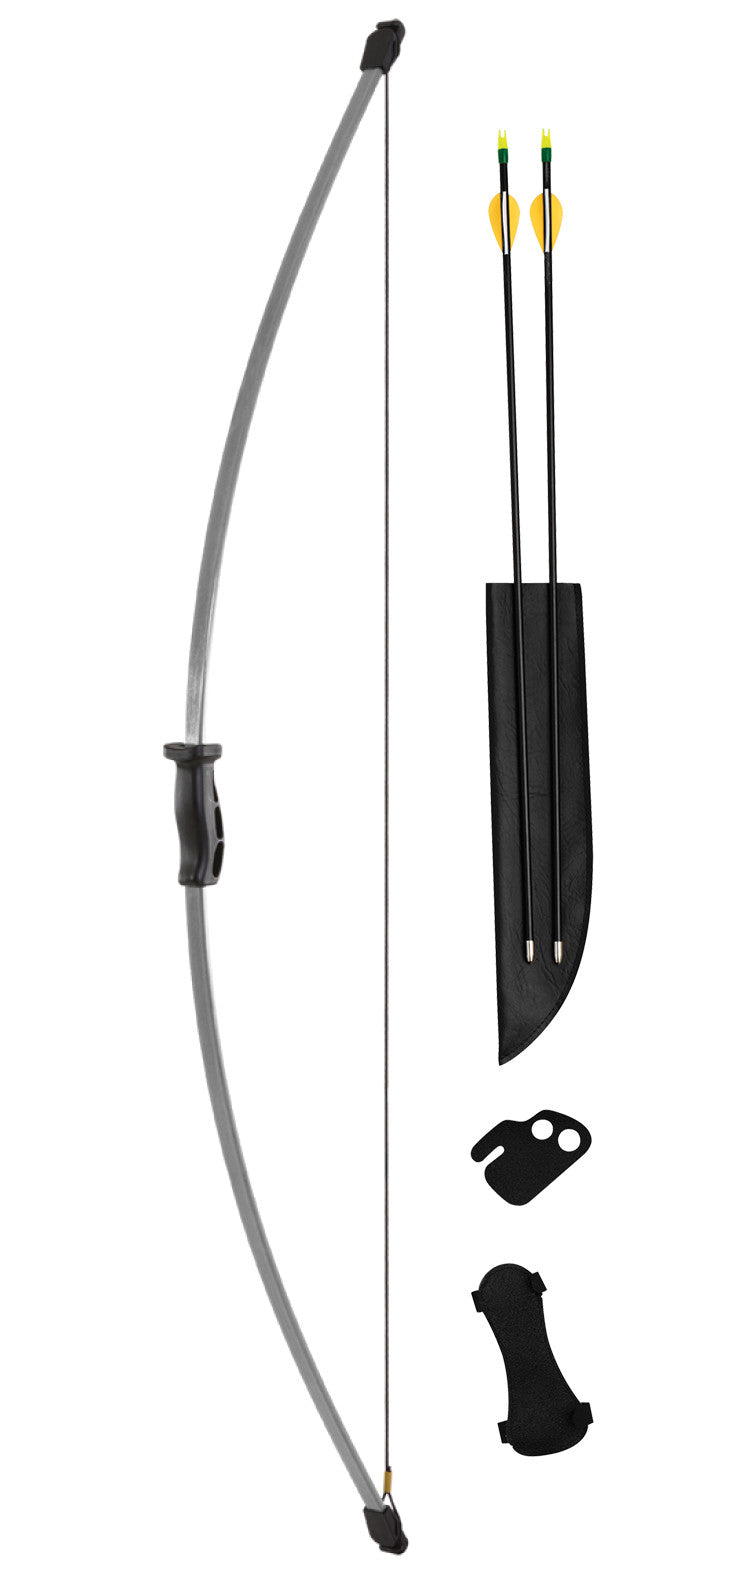 Bear Archery Wizard Youth Bow Set - Youth Recurve Bow